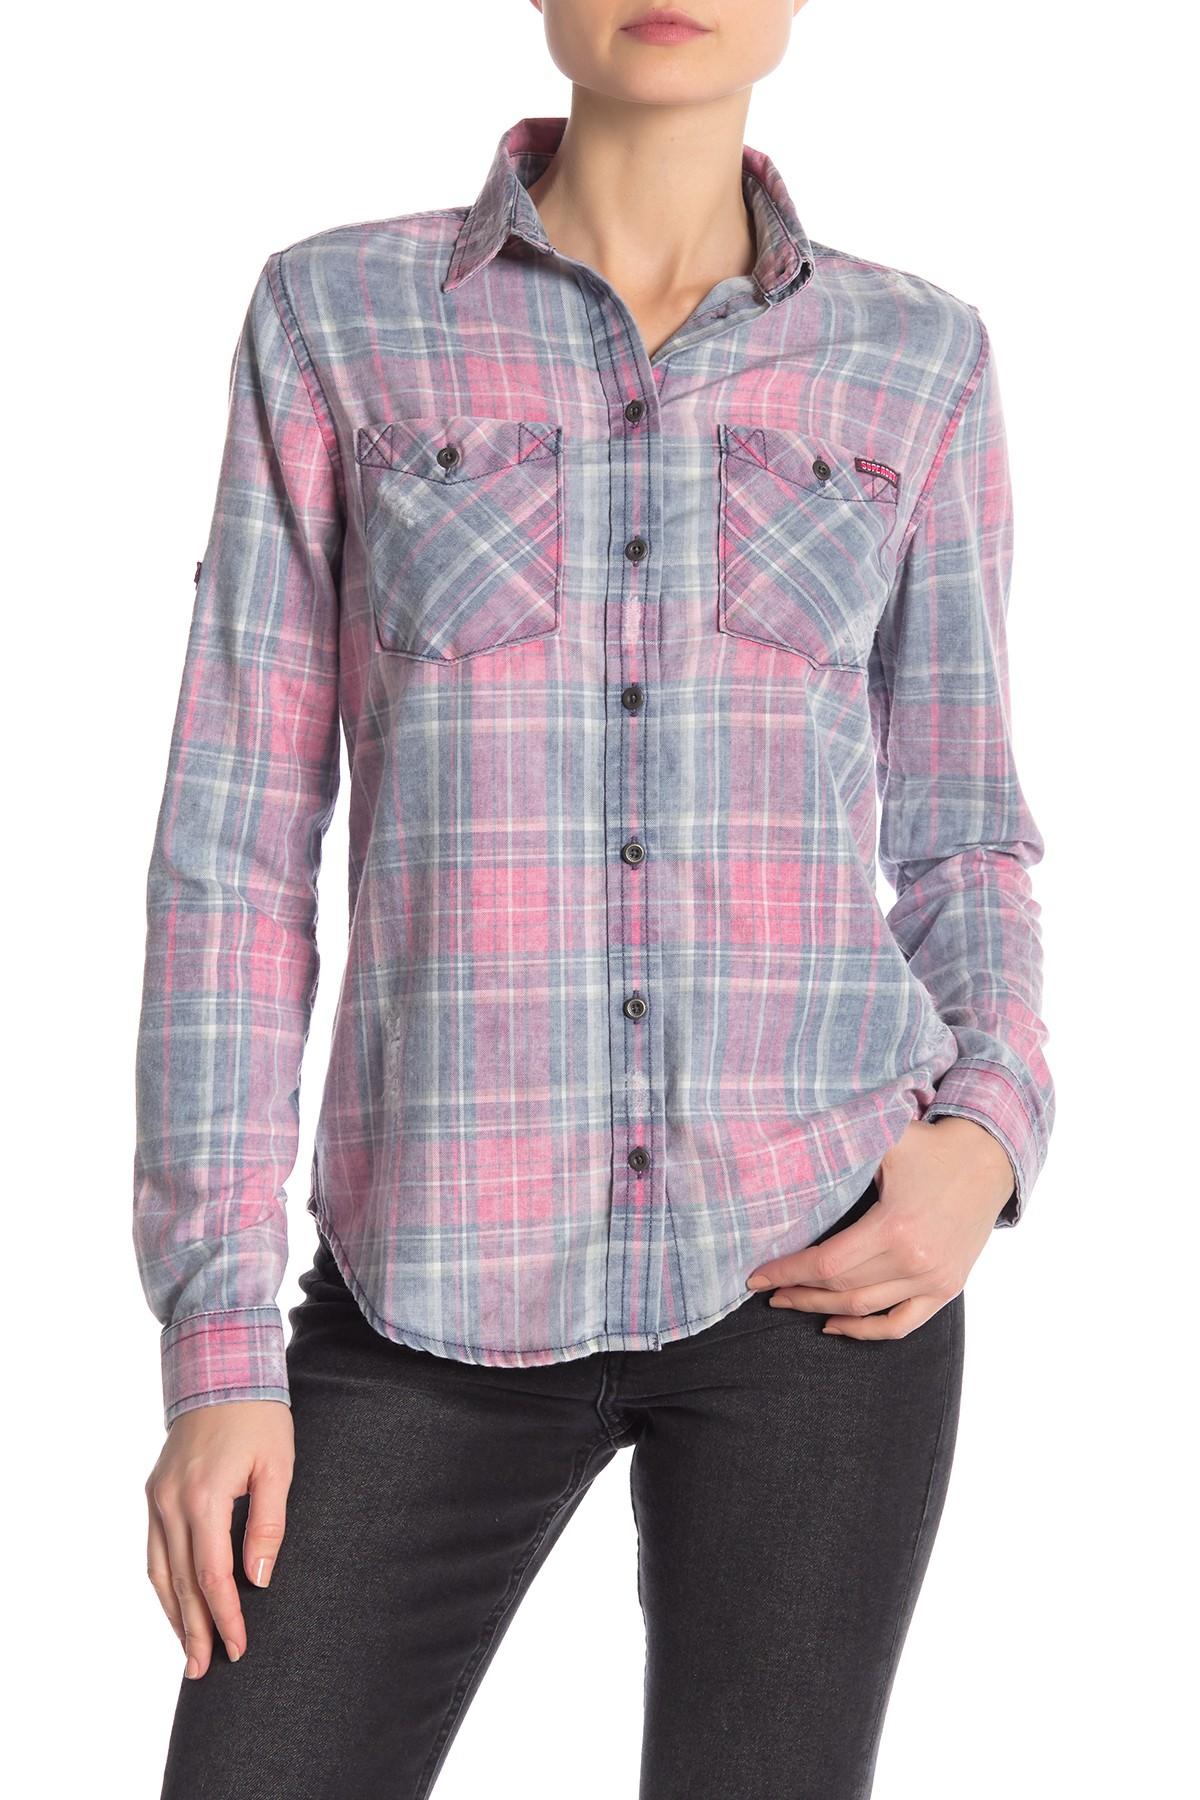 Superdry Alarna Check Shirt in Pink/Grey/Green Check (Pink) - Lyst